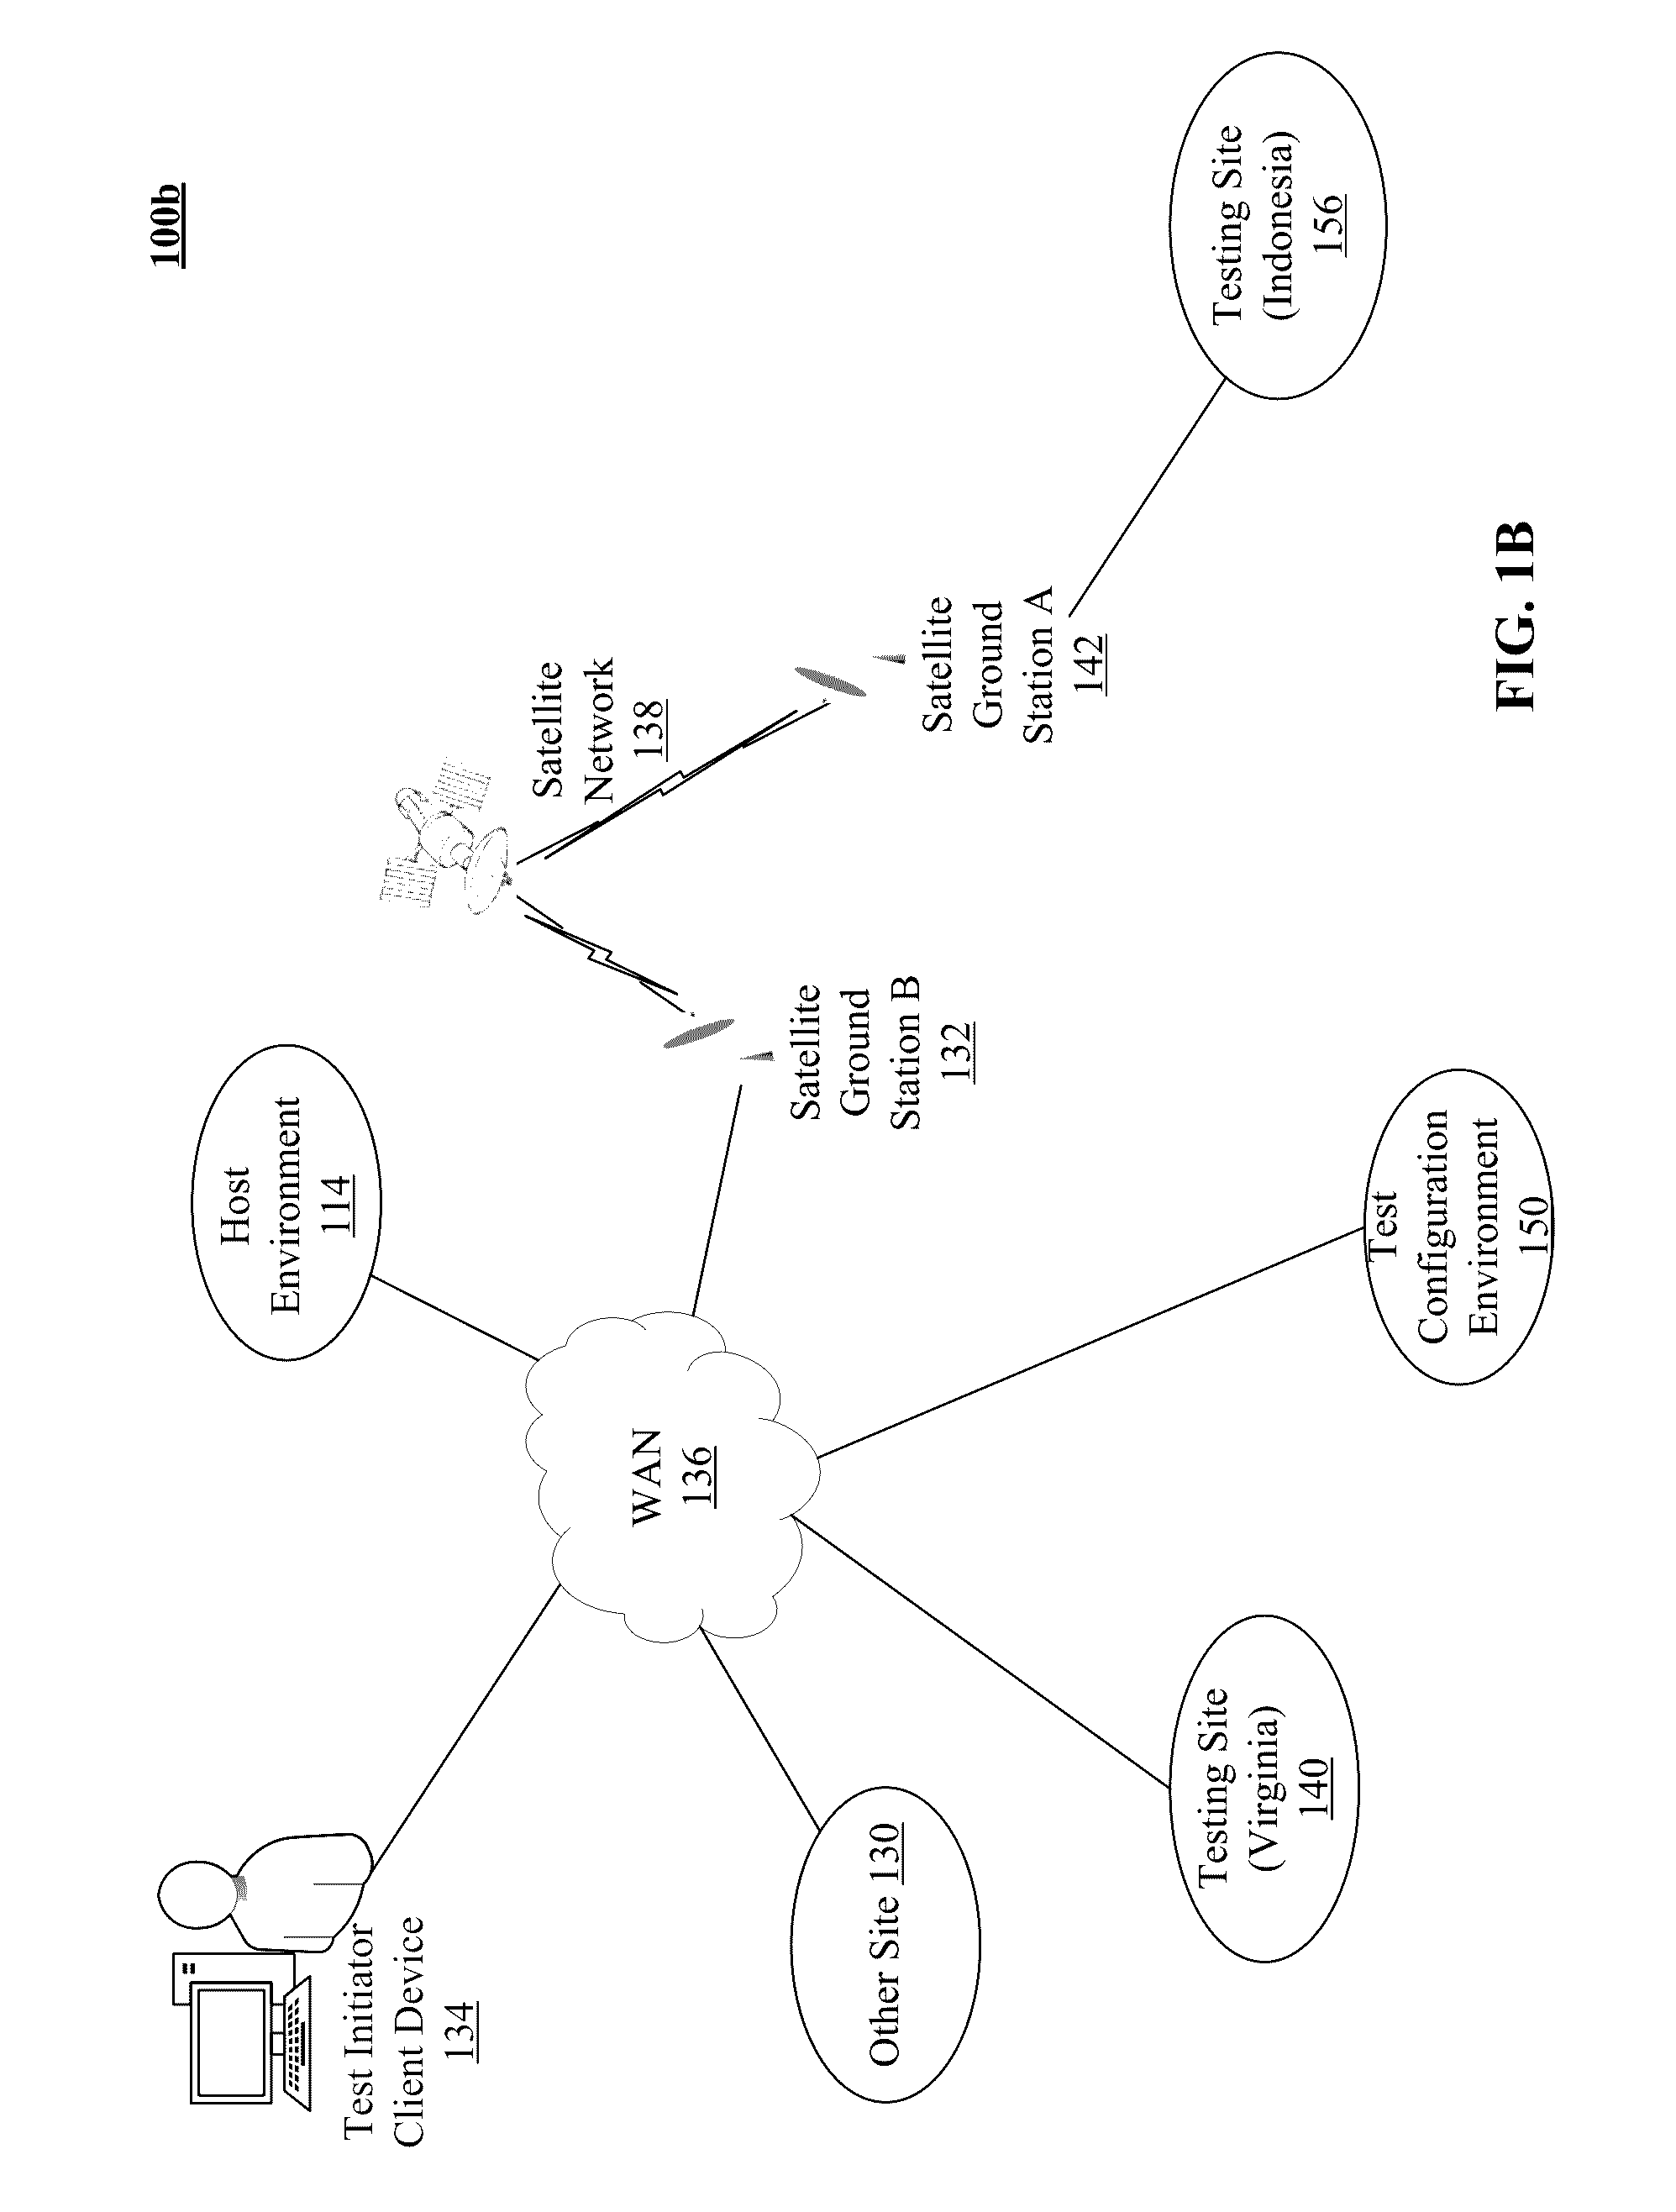 Method to configure monitoring thresholds using output of load or resource loadings